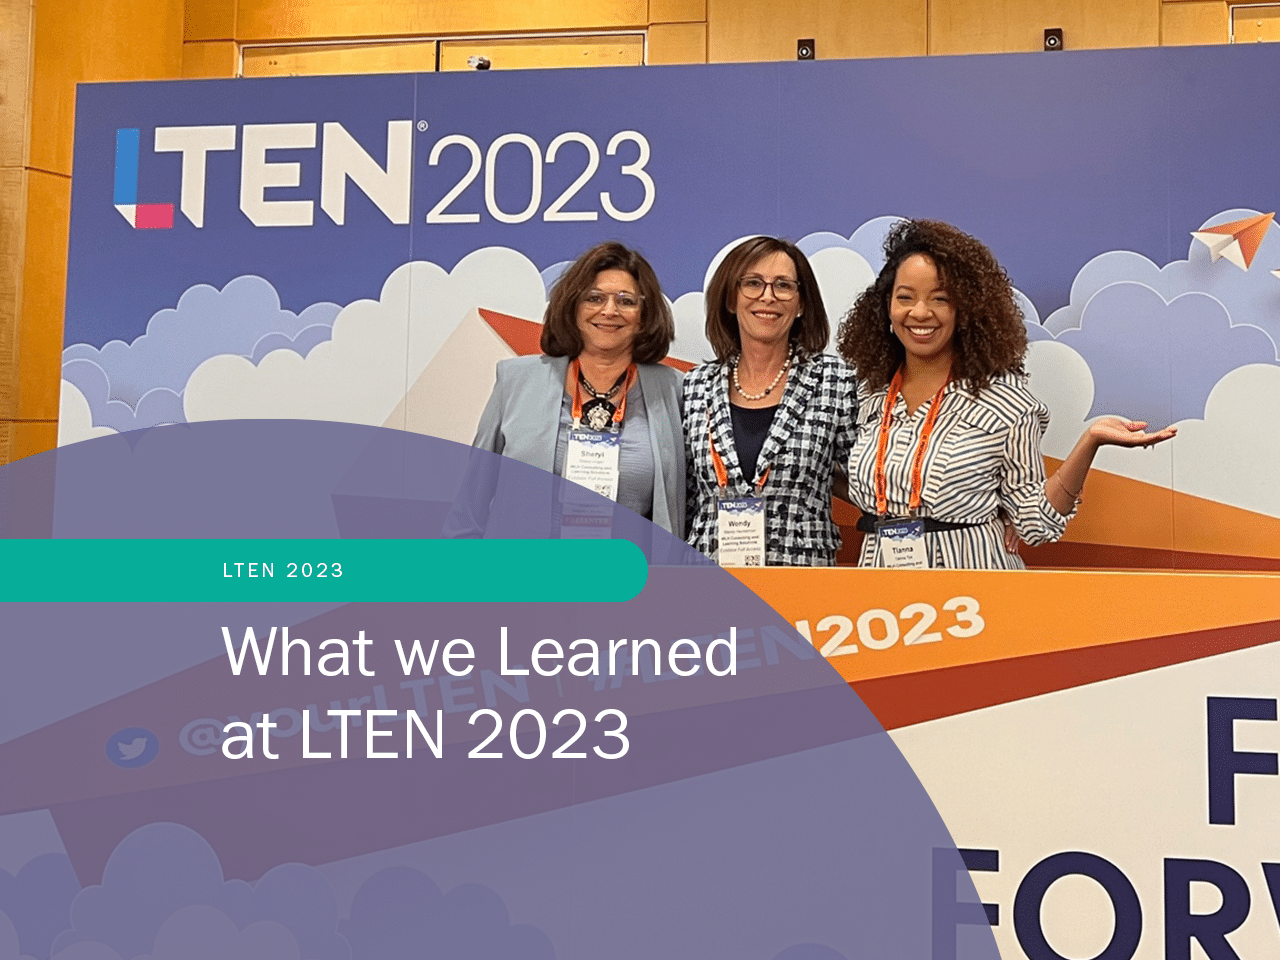 What we Learned at LTEN 2023